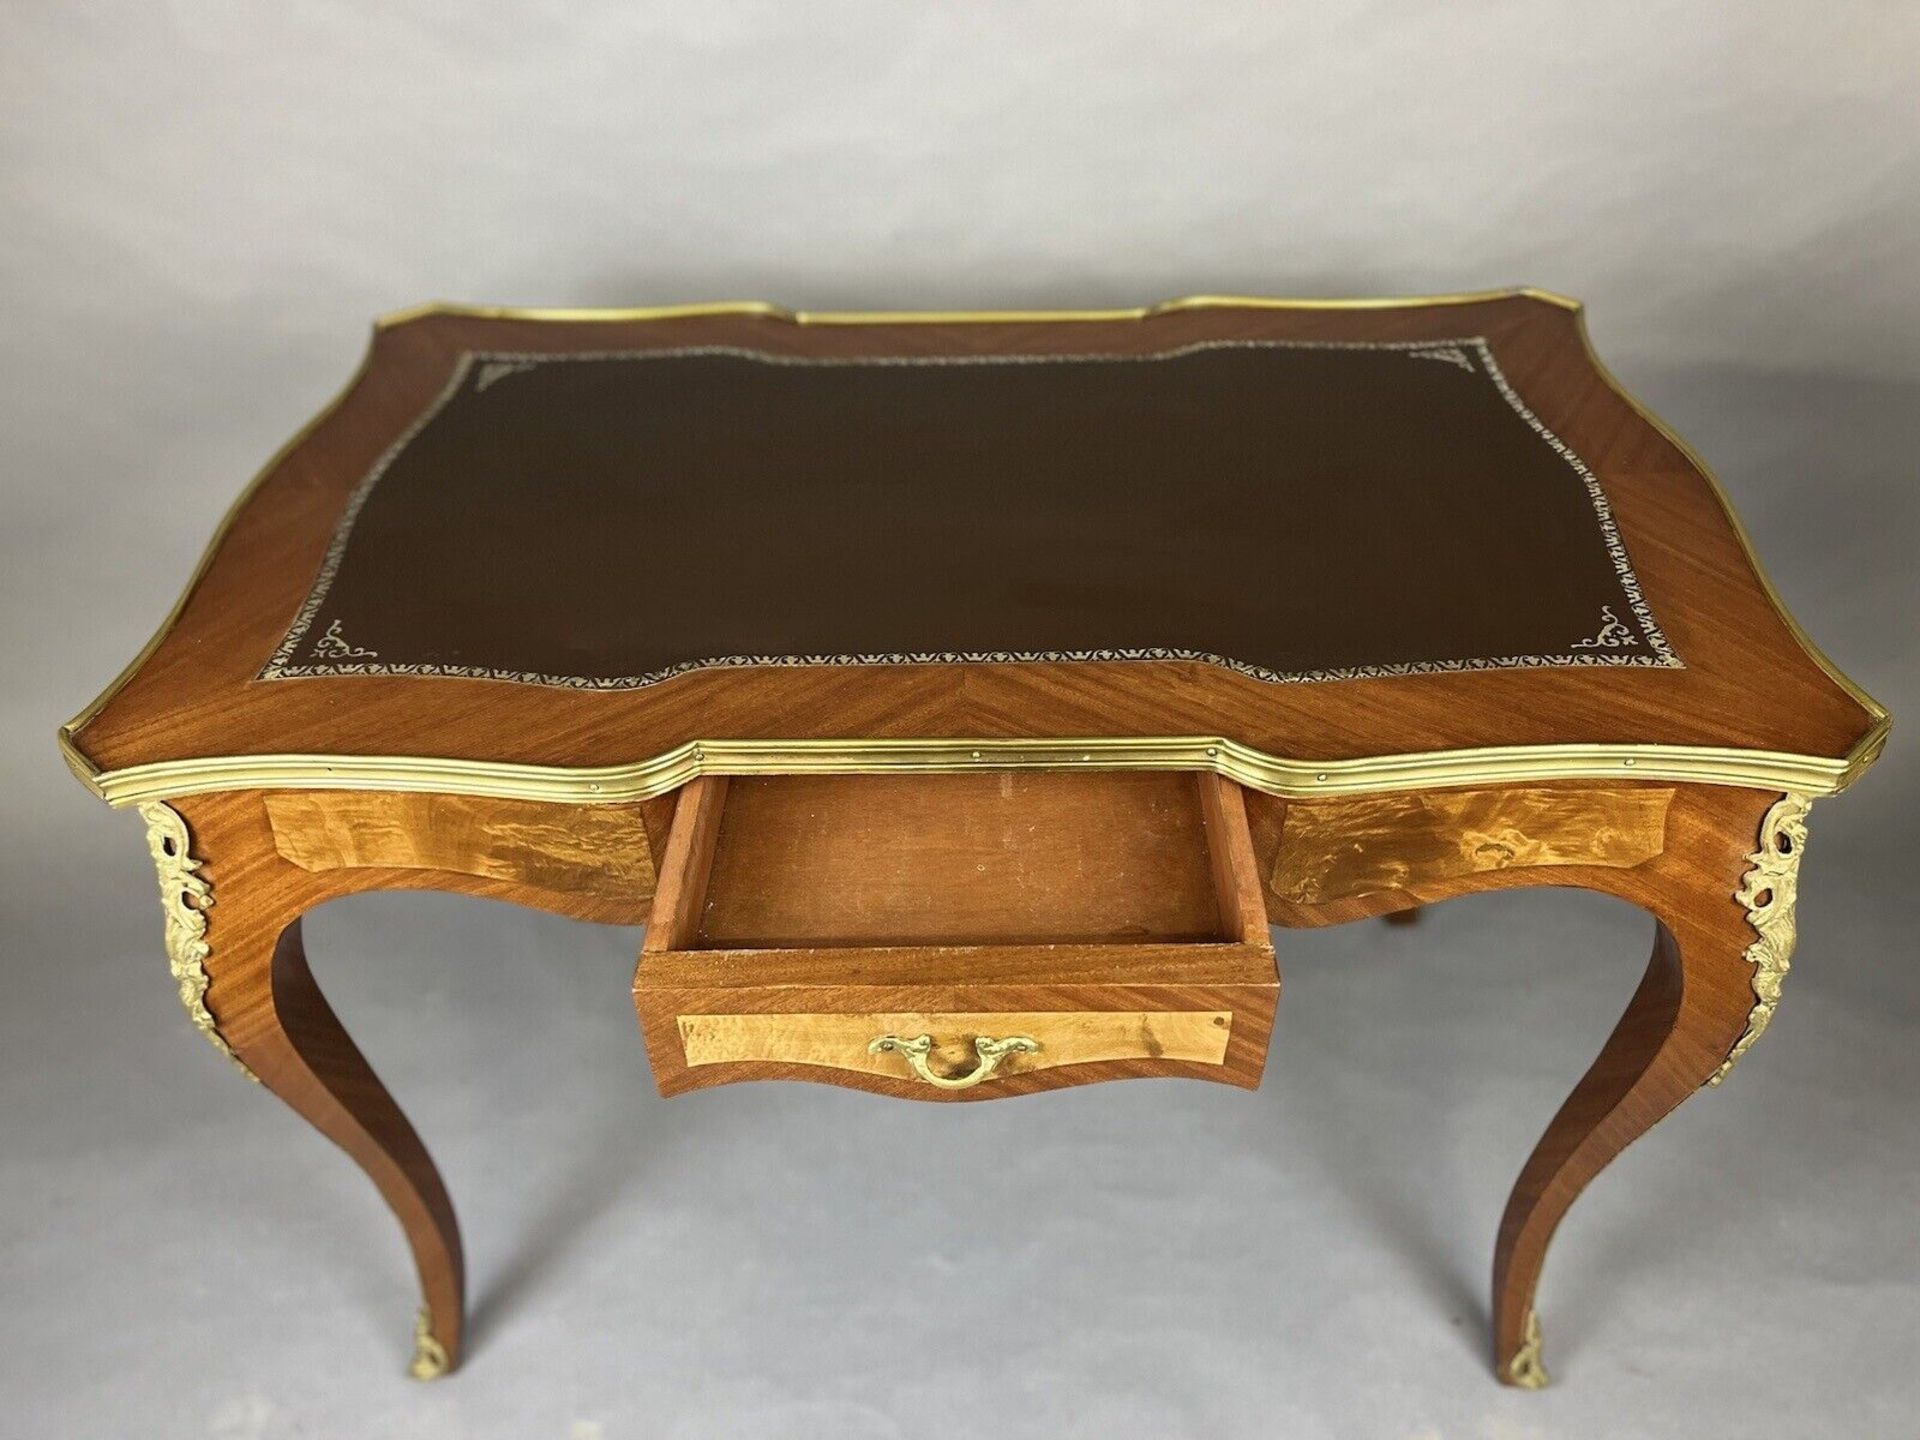 French Louis XV Style Kingwood Leather Inlay Bureau Plat Desk With Gilt Bronze Ormolu The Shaped Top - Image 6 of 7